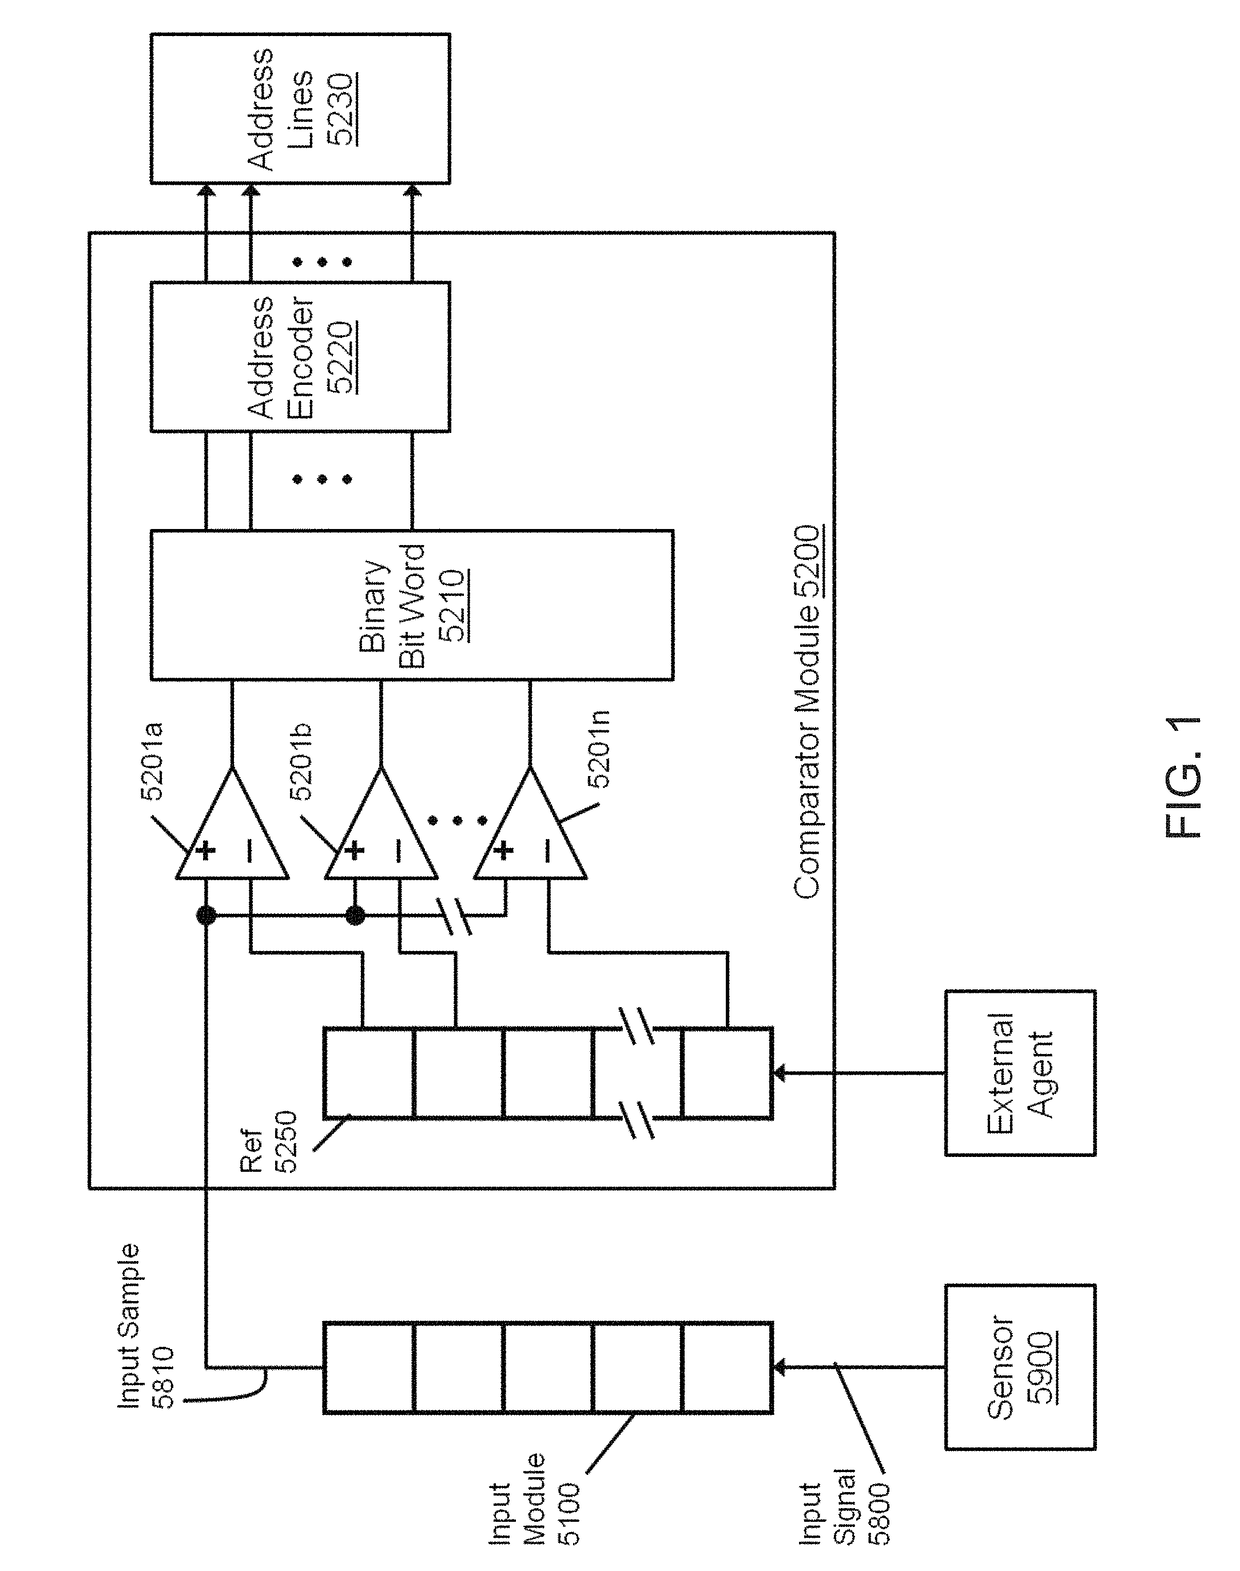 Compressive sensing systems and related methods